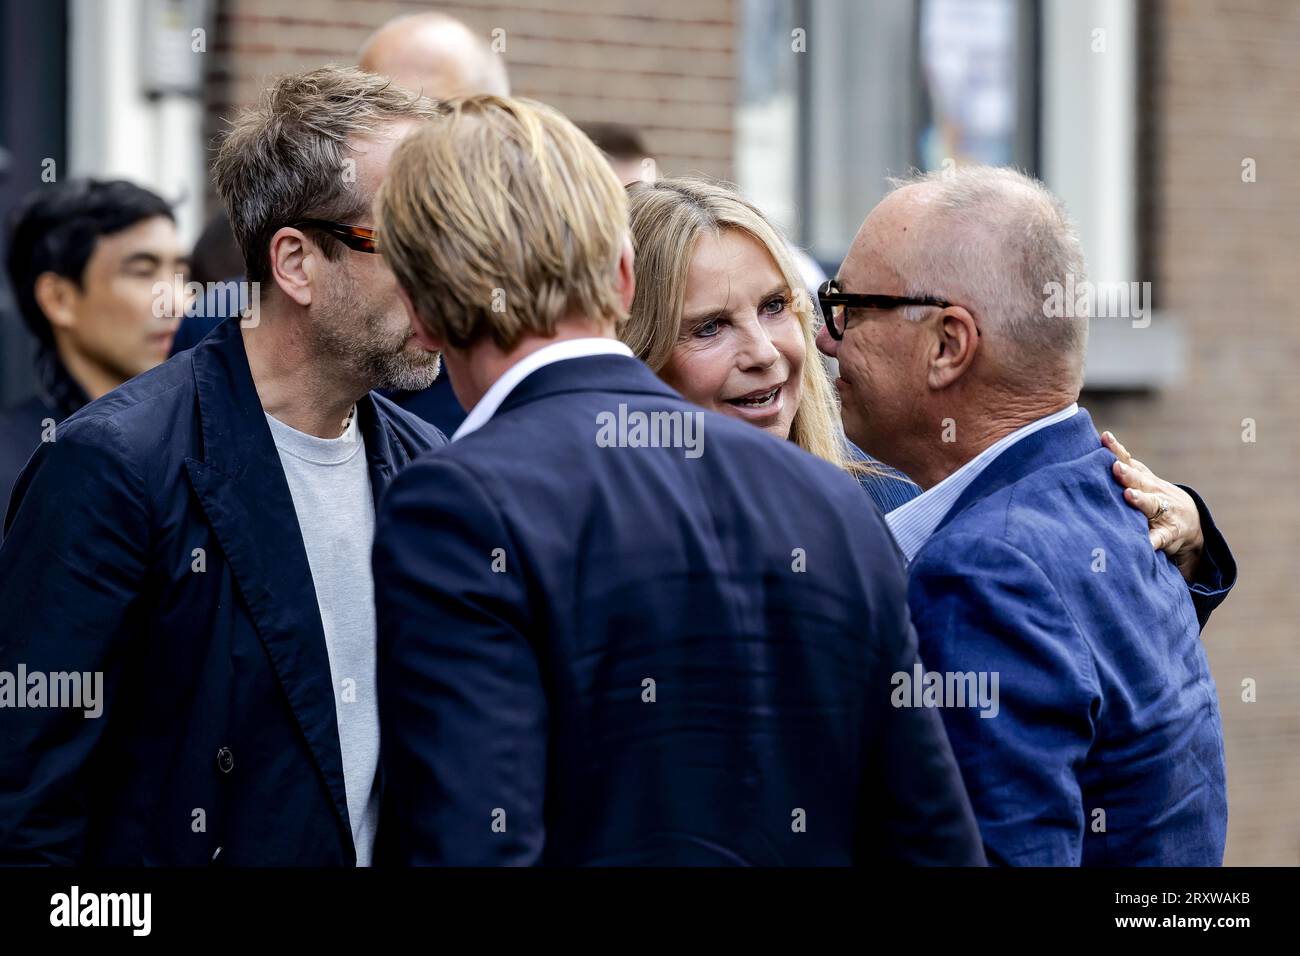 AMSTERDAM - Linda de Mol arrives at the Westerkerk for the funeral service of Erwin Olaf. The world-famous photographer died at the age of 64 while recovering from a lung transplant. ANP ROBIN VAN LONKHUIJSEN netherlands out - belgium out Stock Photo